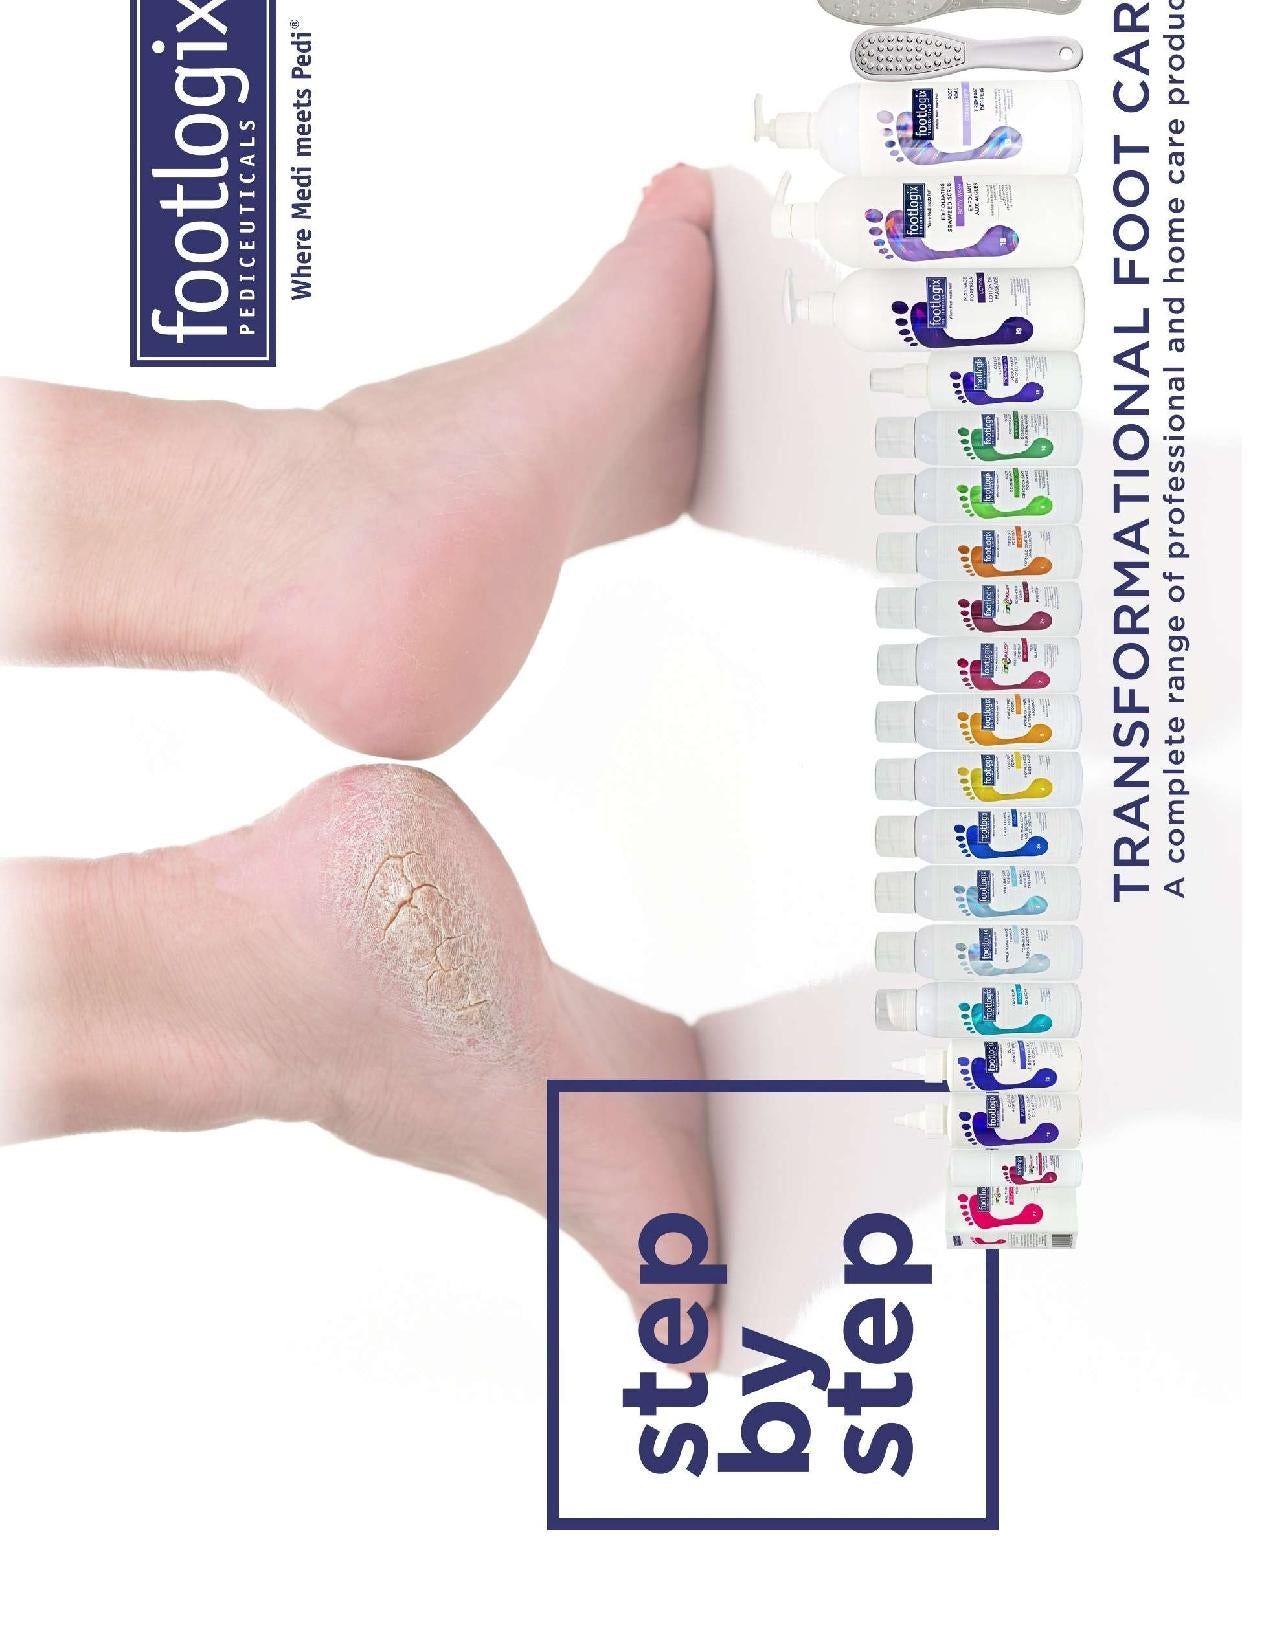 Footlogix 16 page Spiraleen Product Catalogue